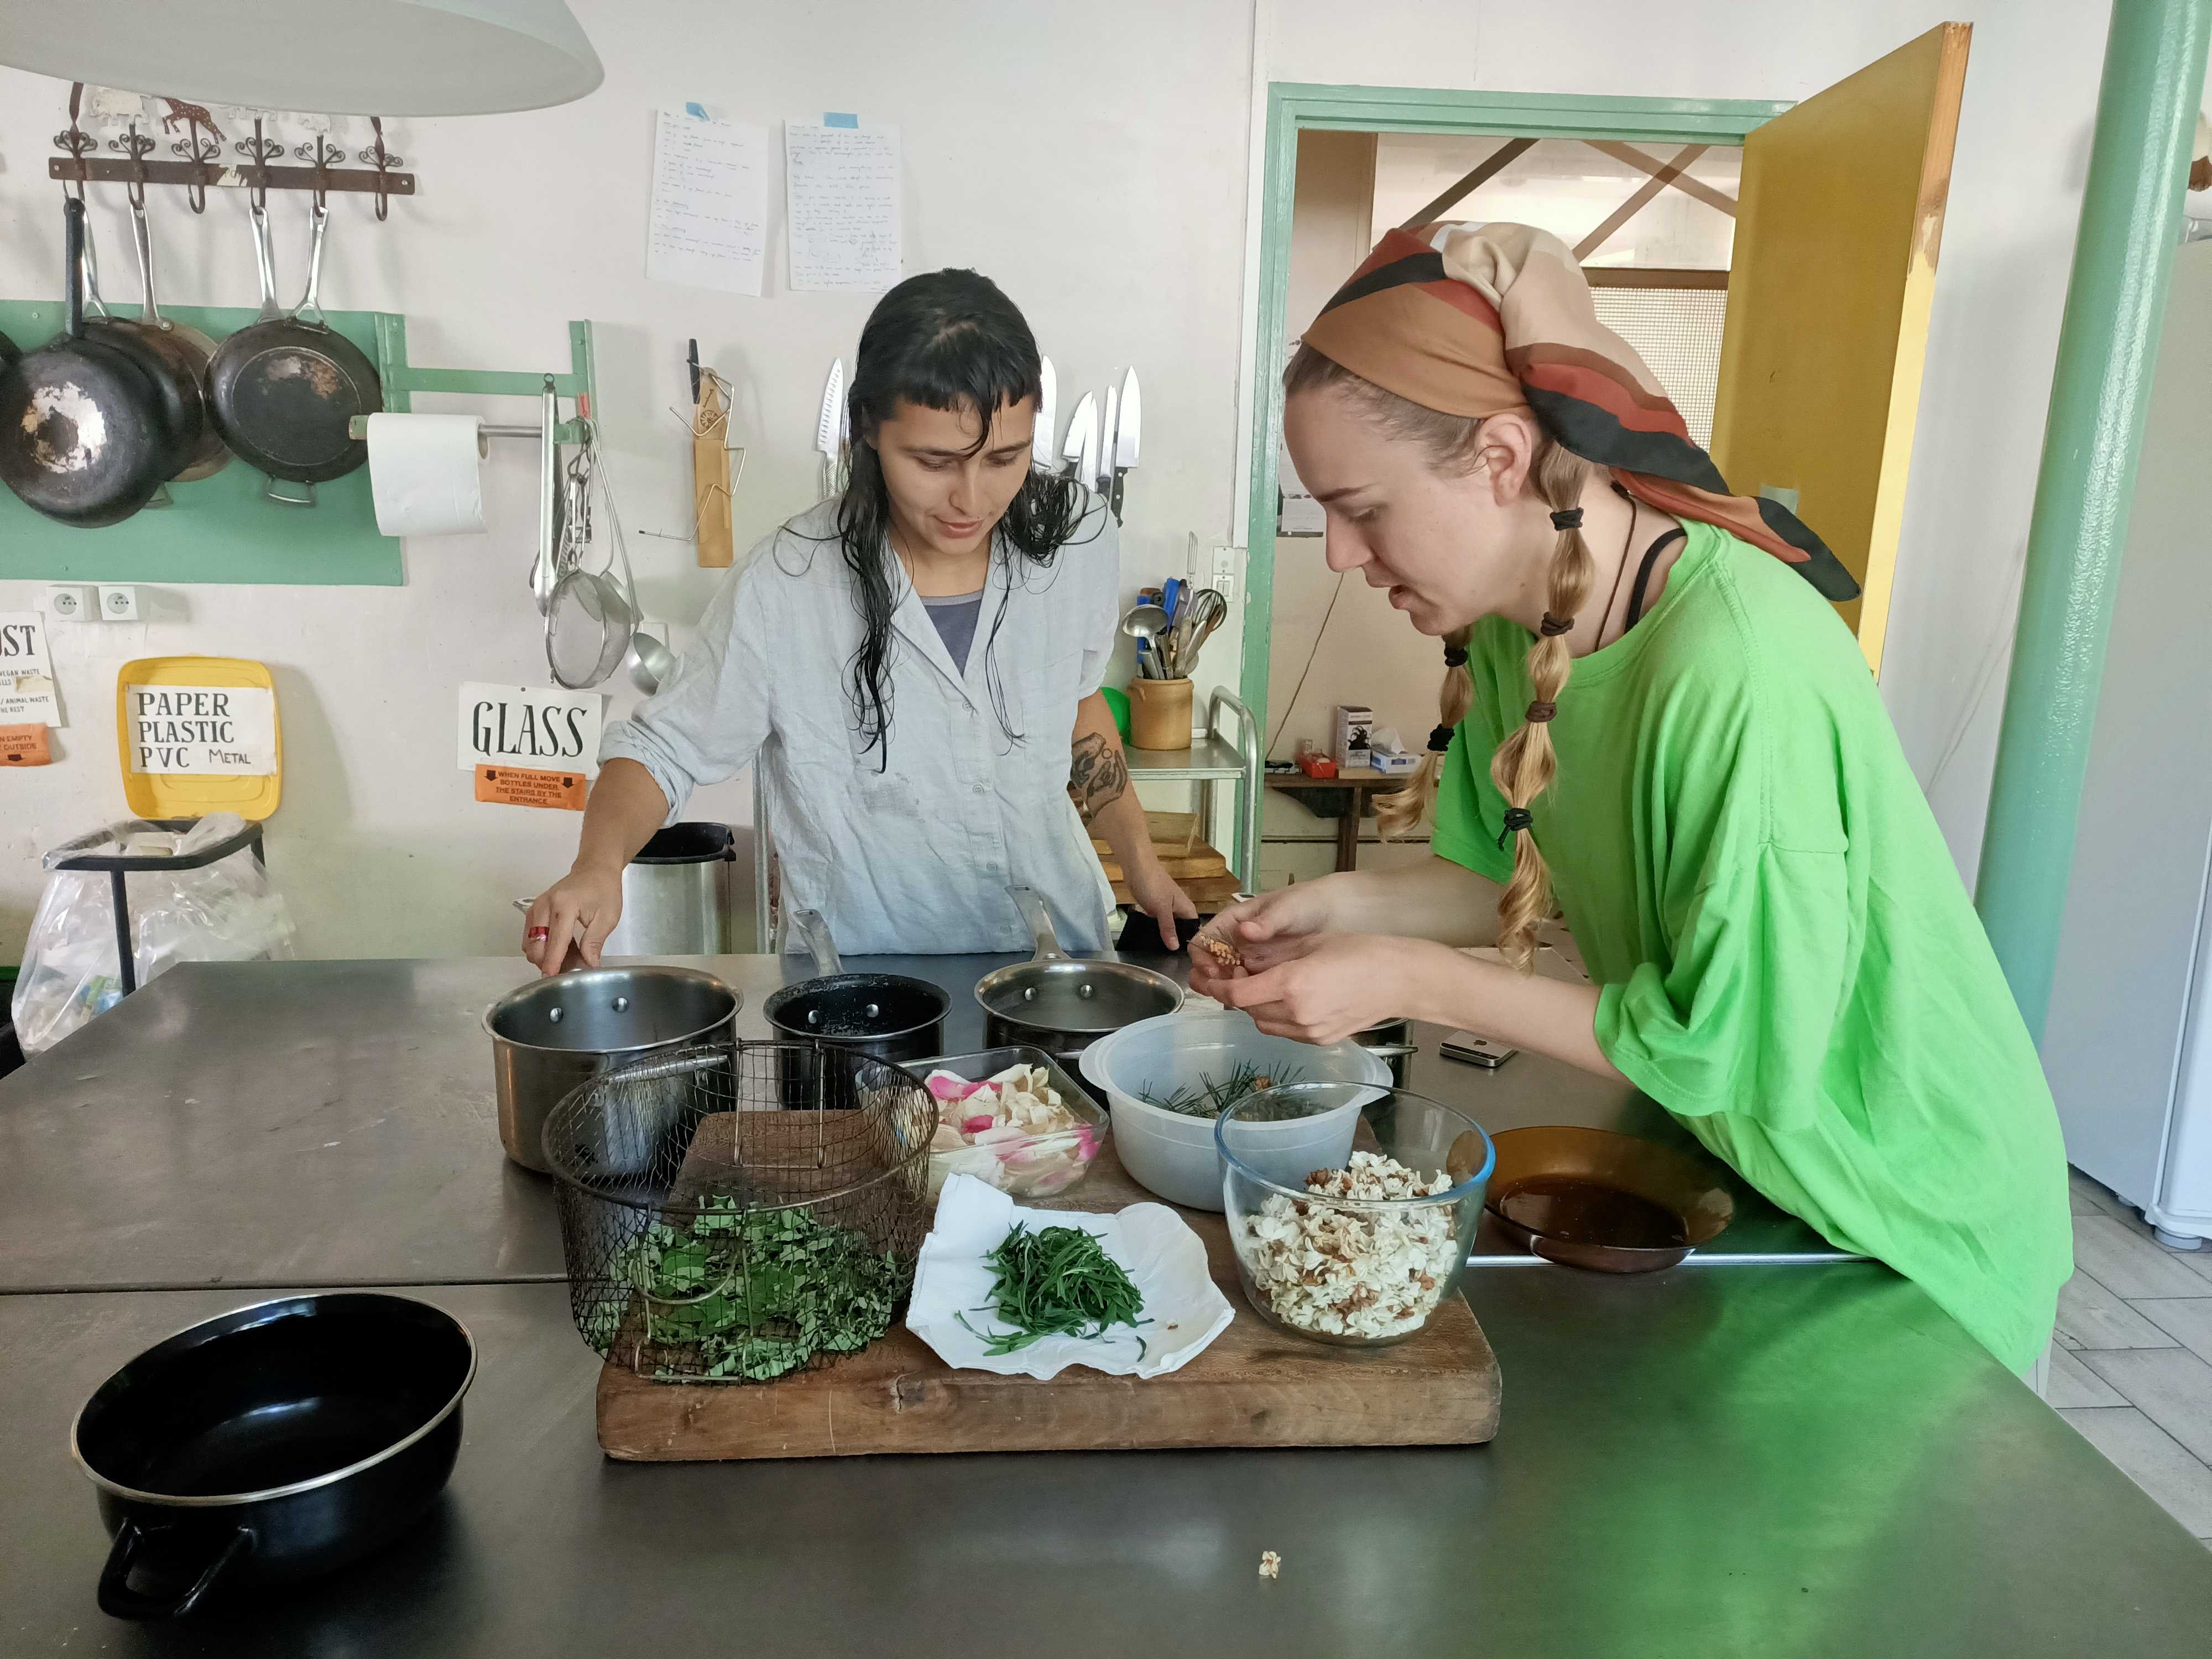 Alexandra  Martens Serrano & Emmeli Person preparing a syrup based on handpicked ingredients from the garden at PAF, St. erme. DAI Week June, 2022.